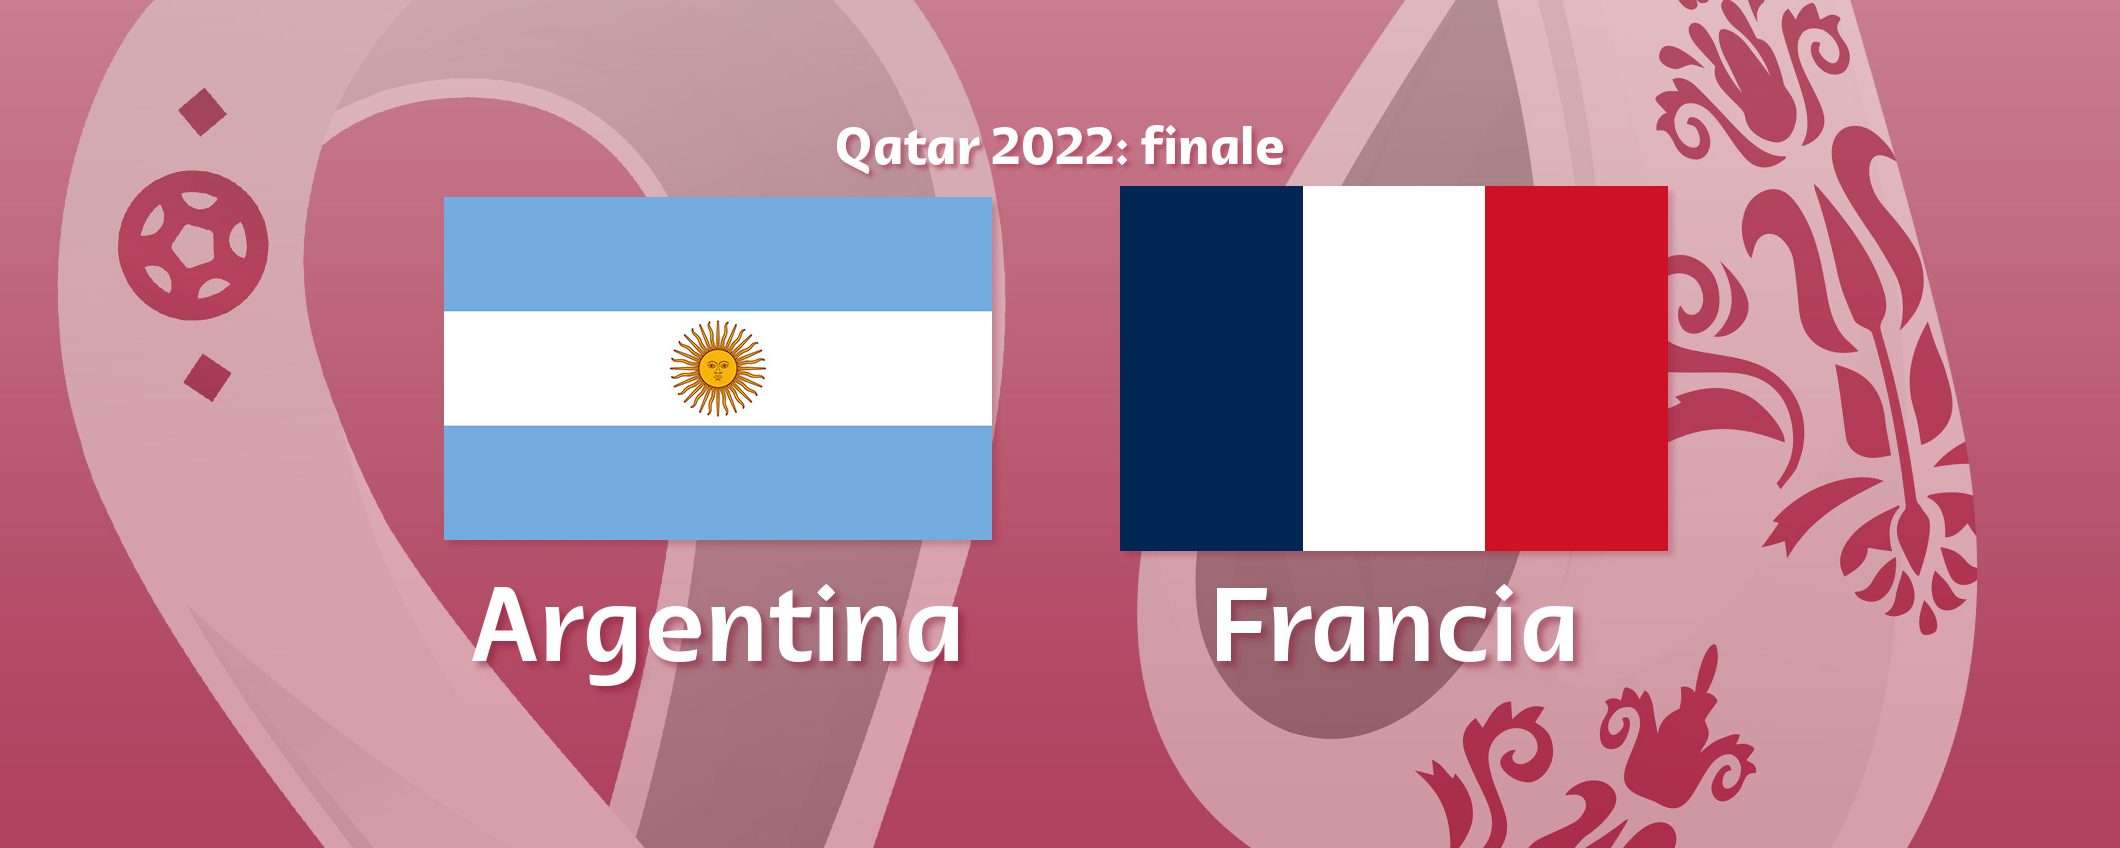 Come vedere Argentina-Francia in streaming